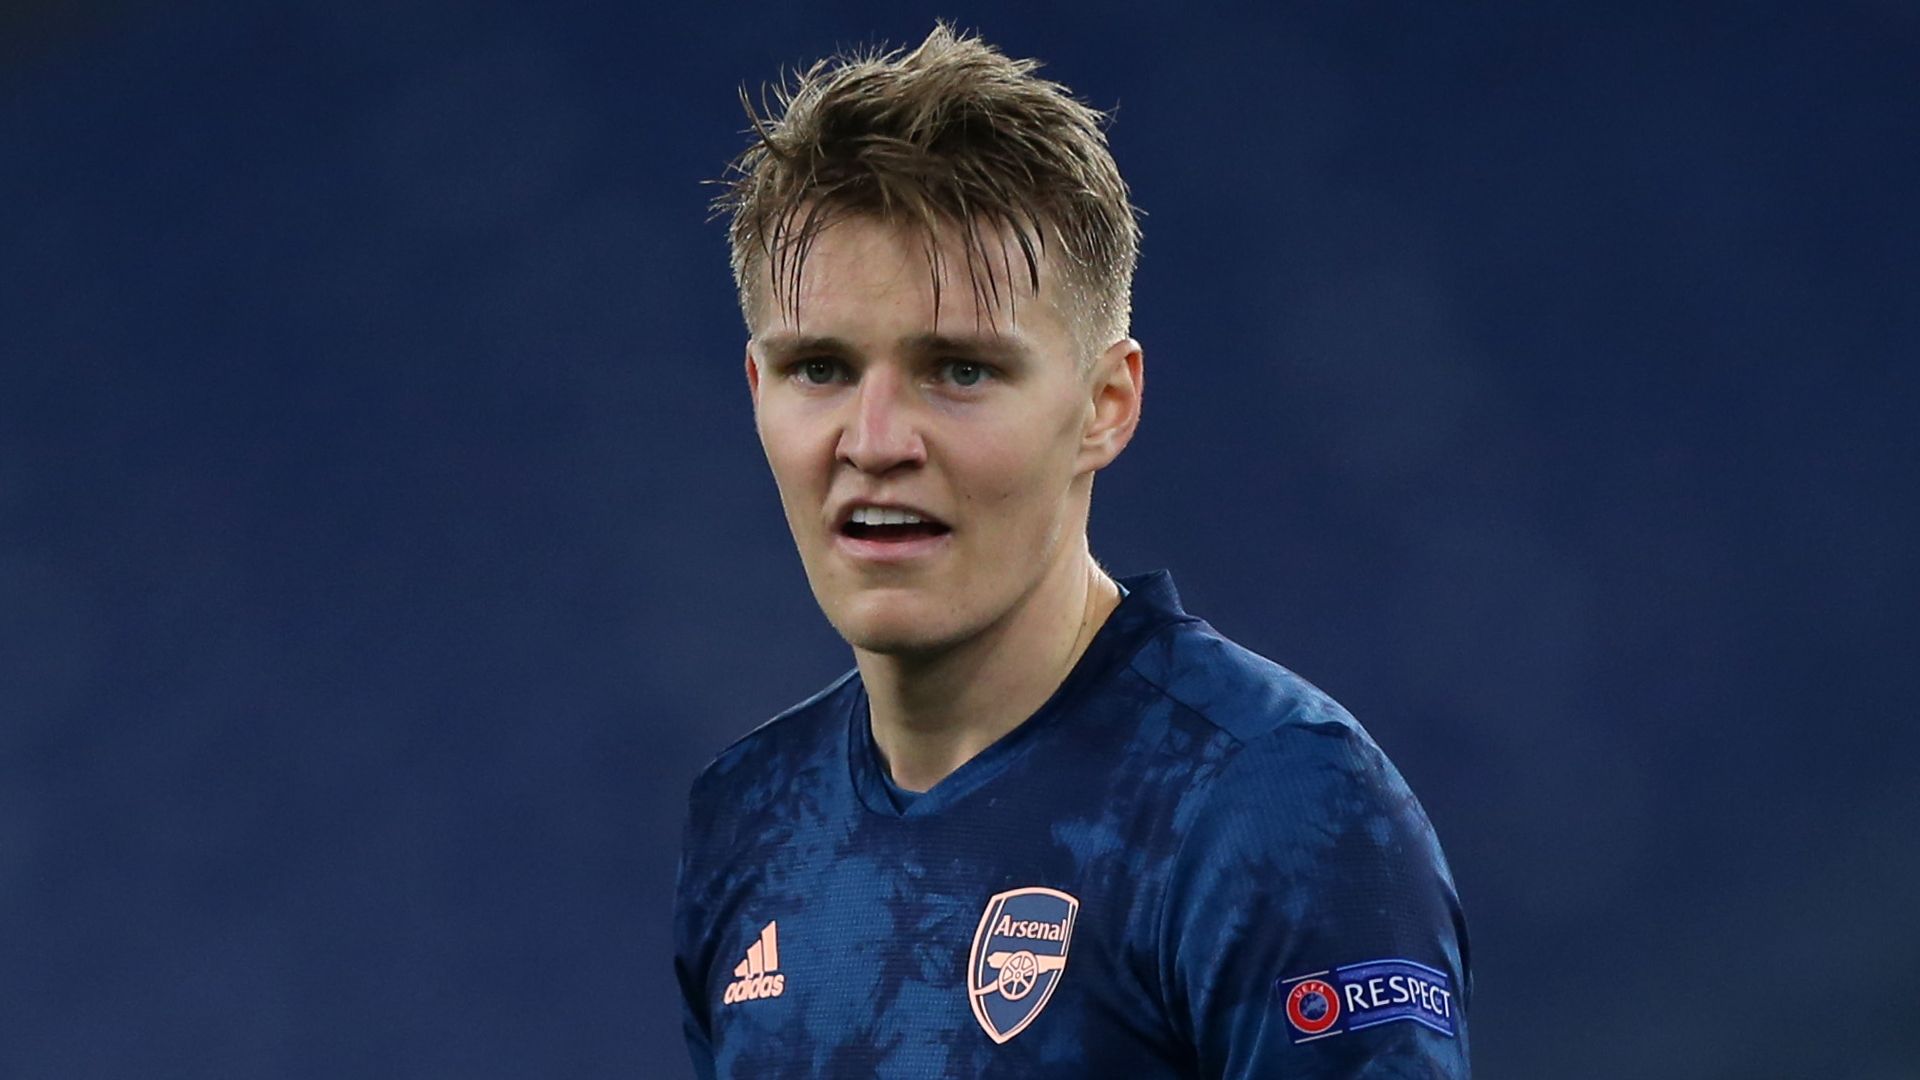 Norway boss Solbakken calms Arsenal fears after Odegaard taken off with ankle injury